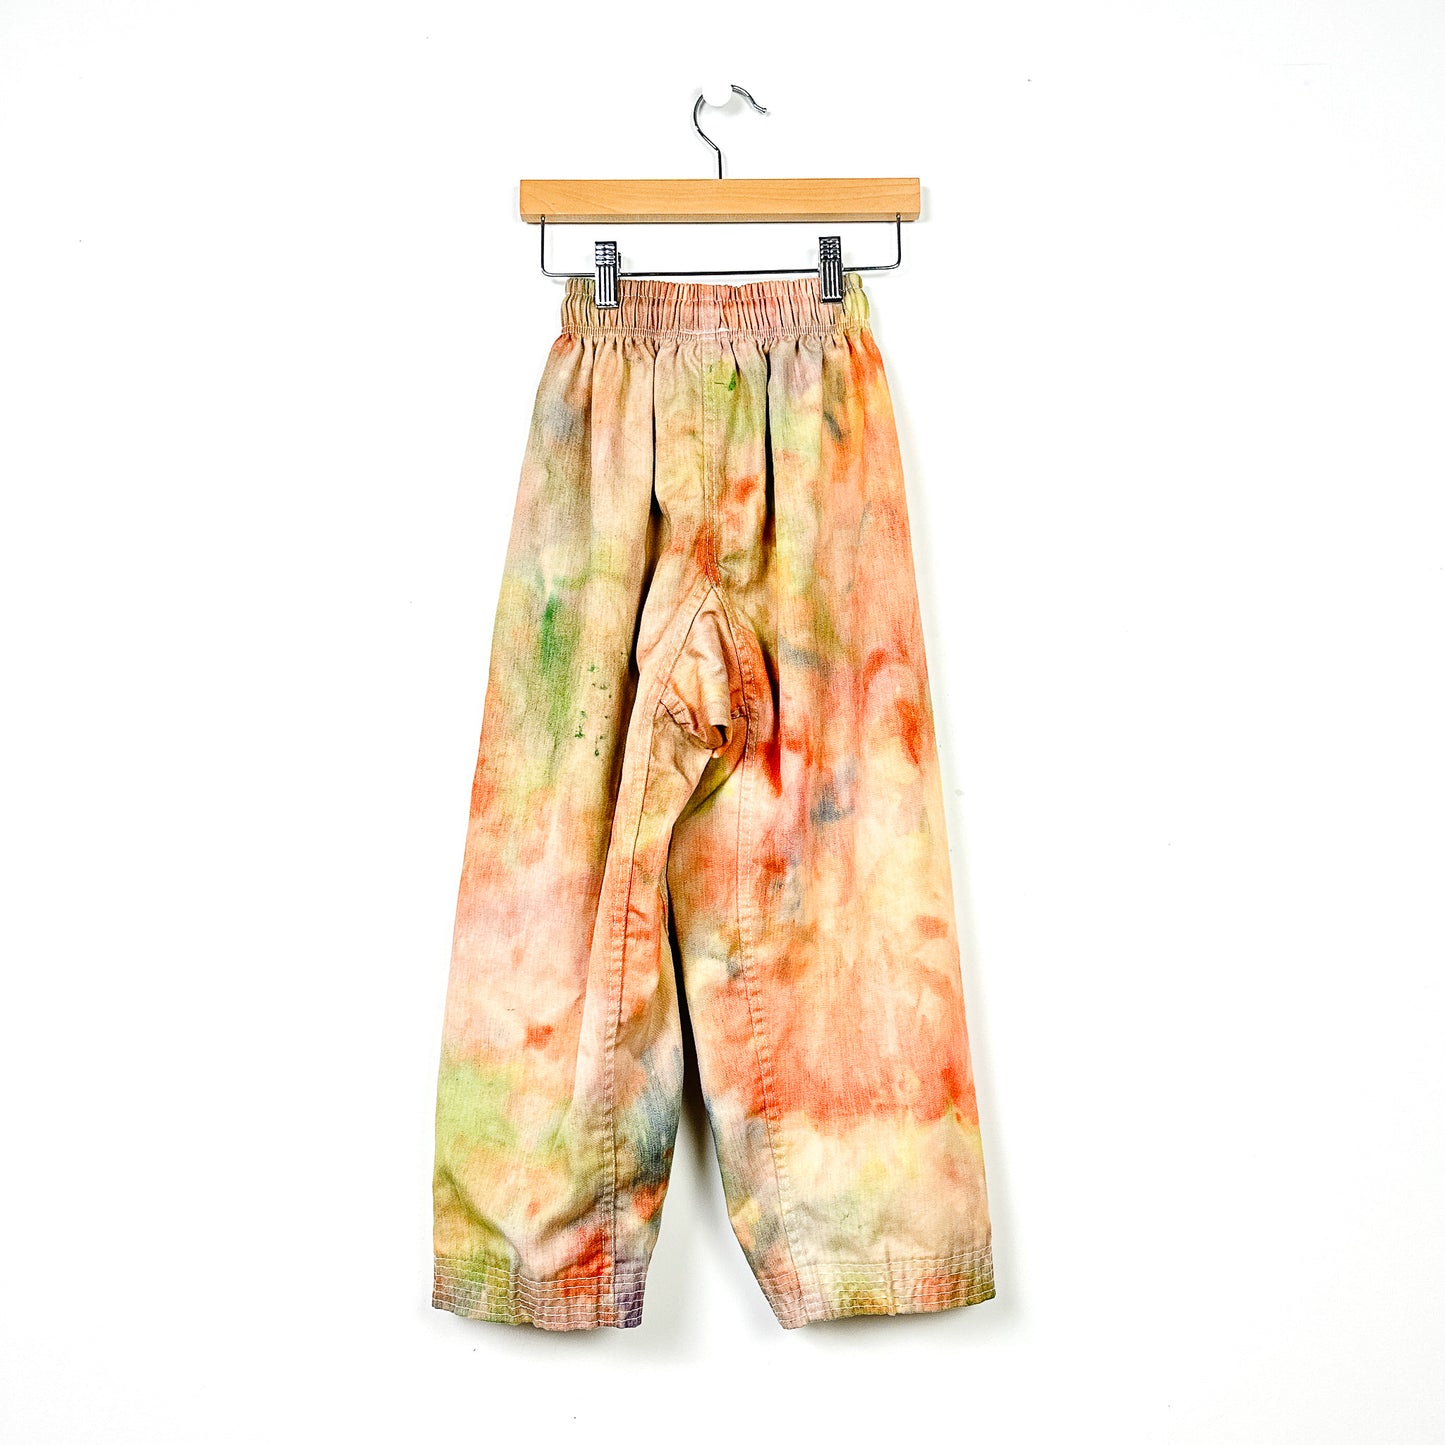 LEISURE - Party Pants 009 - Size 7-8yr